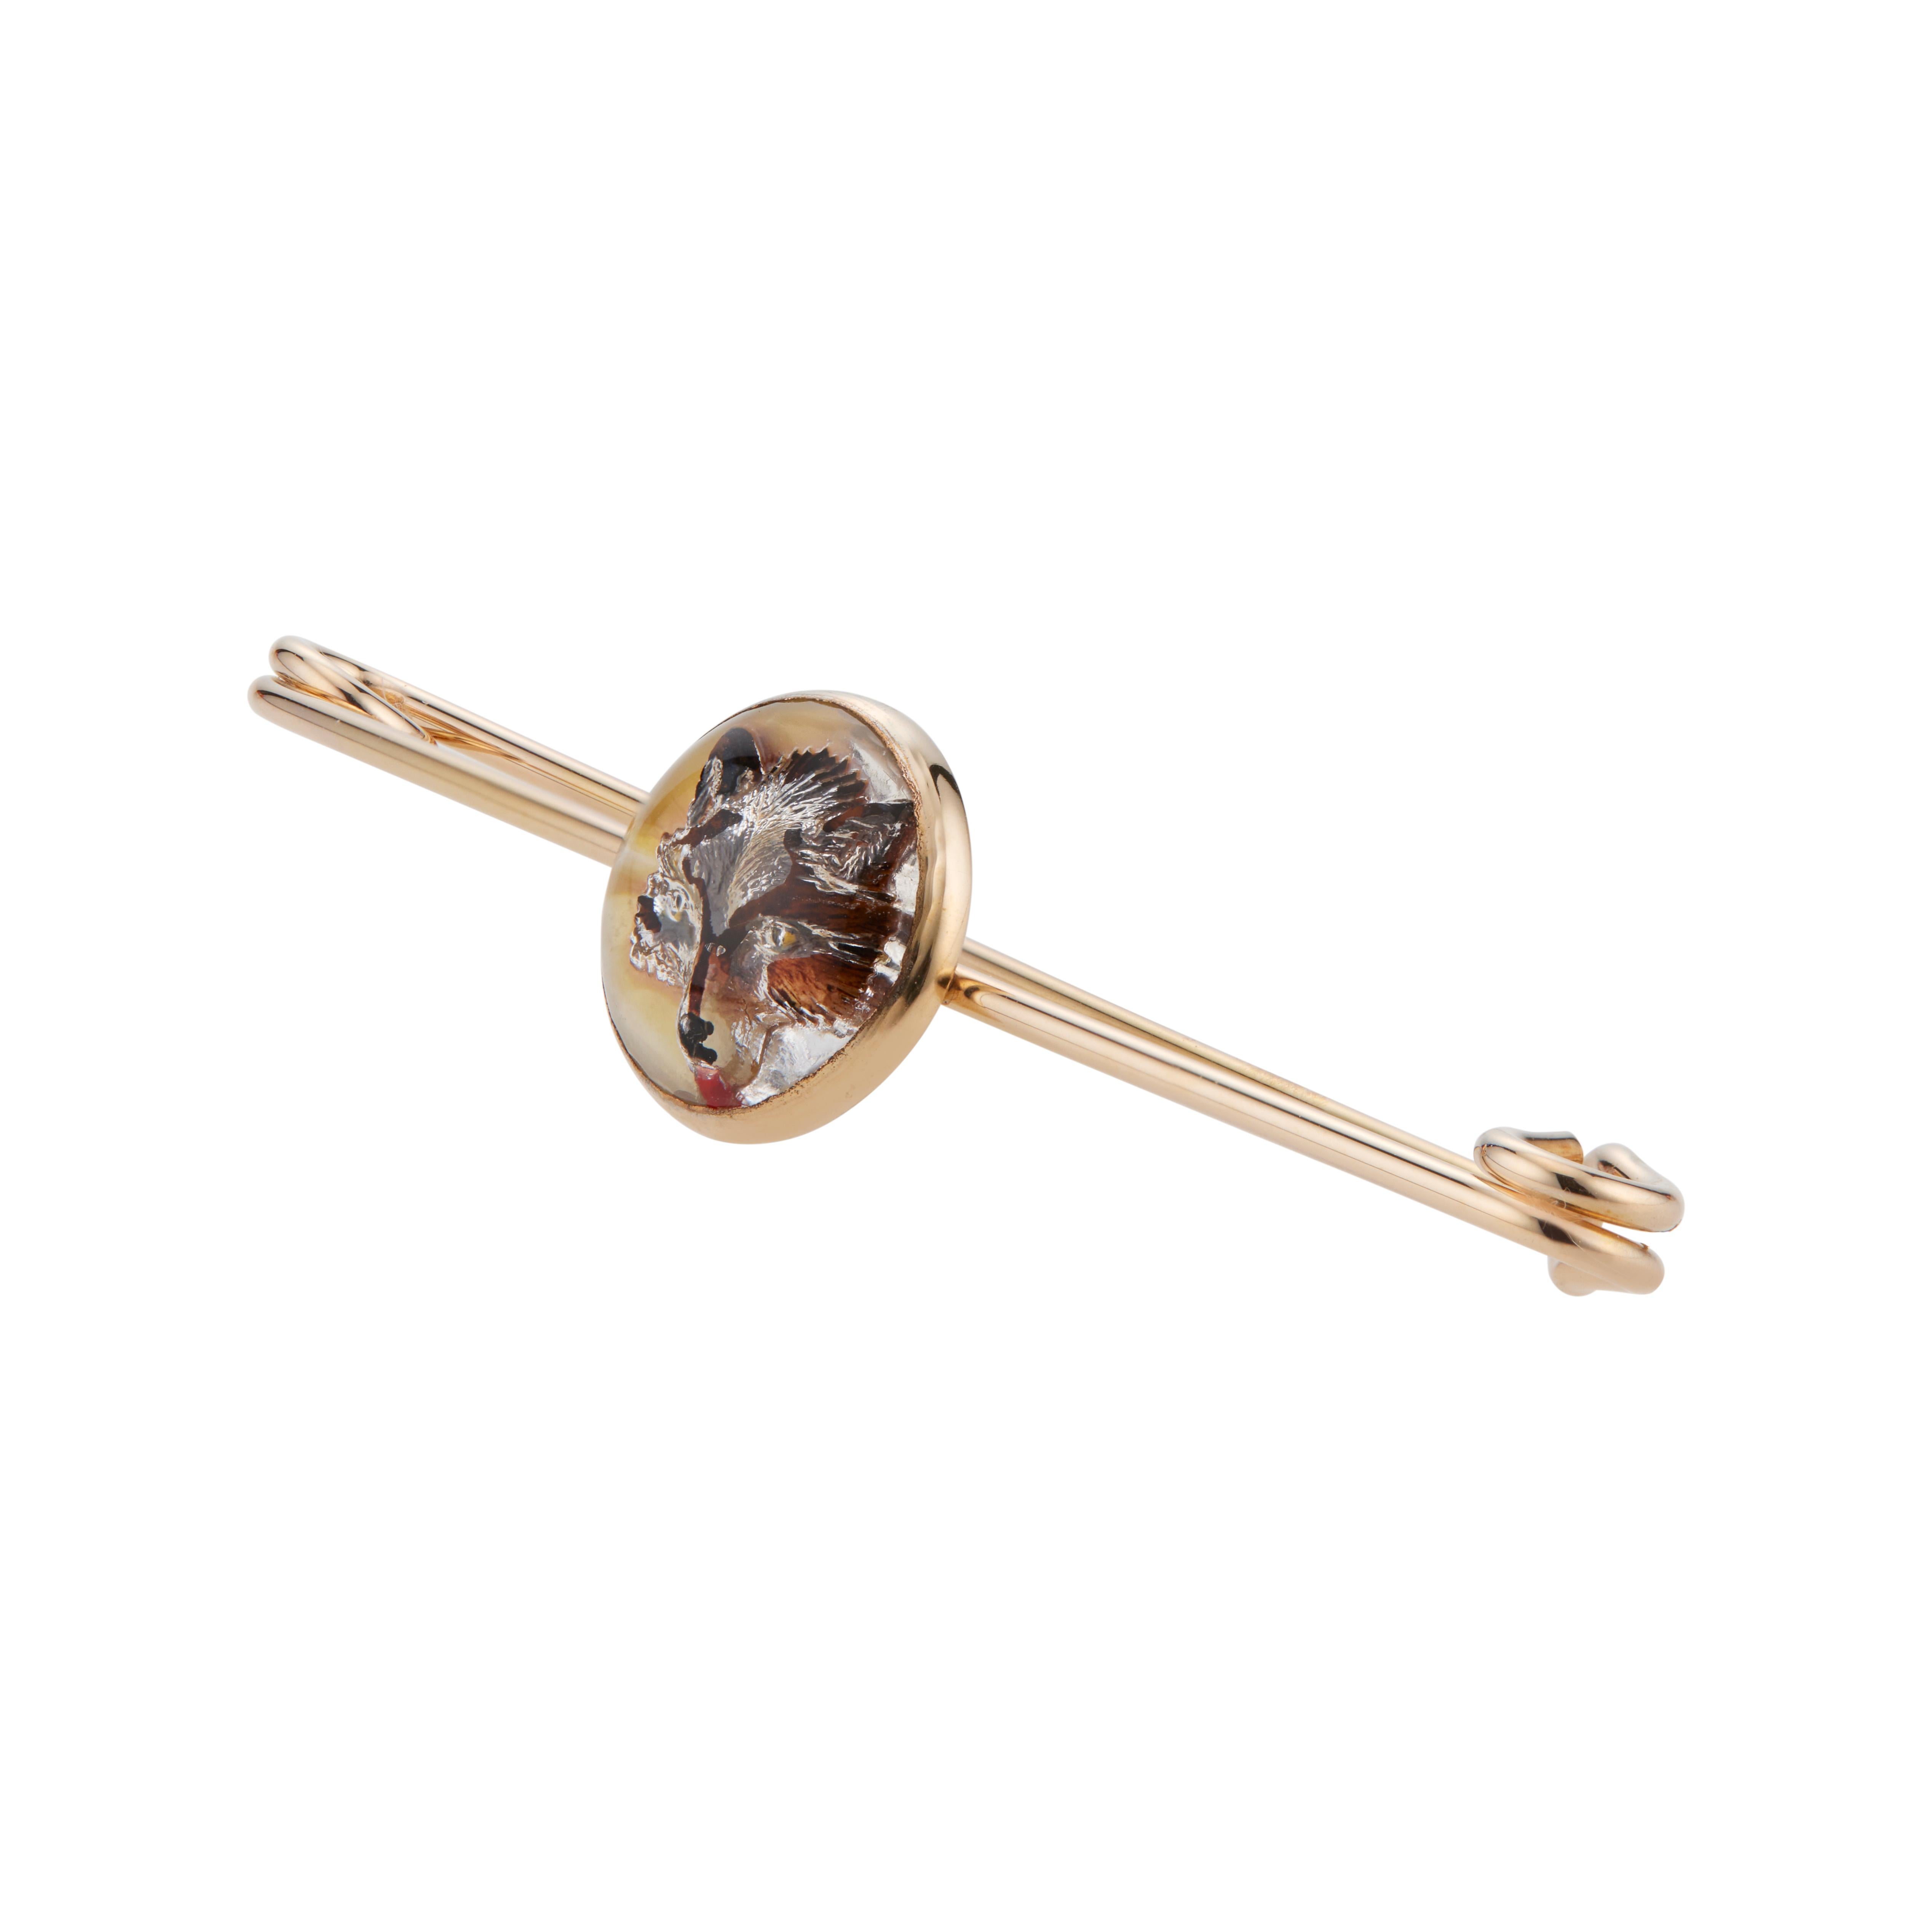 1930's Hand carved quartz crystal fox face brooch in 14k yellow gold. 

1 round cabochon crystal 
14k yellow gold 
Hallmark: correct Quality
3.4 grams
Top to bottom: 13.7mm or .5 Inches
Width: 63.7mm or 2.5 Inches
Depth or thickness: 5.7mm
